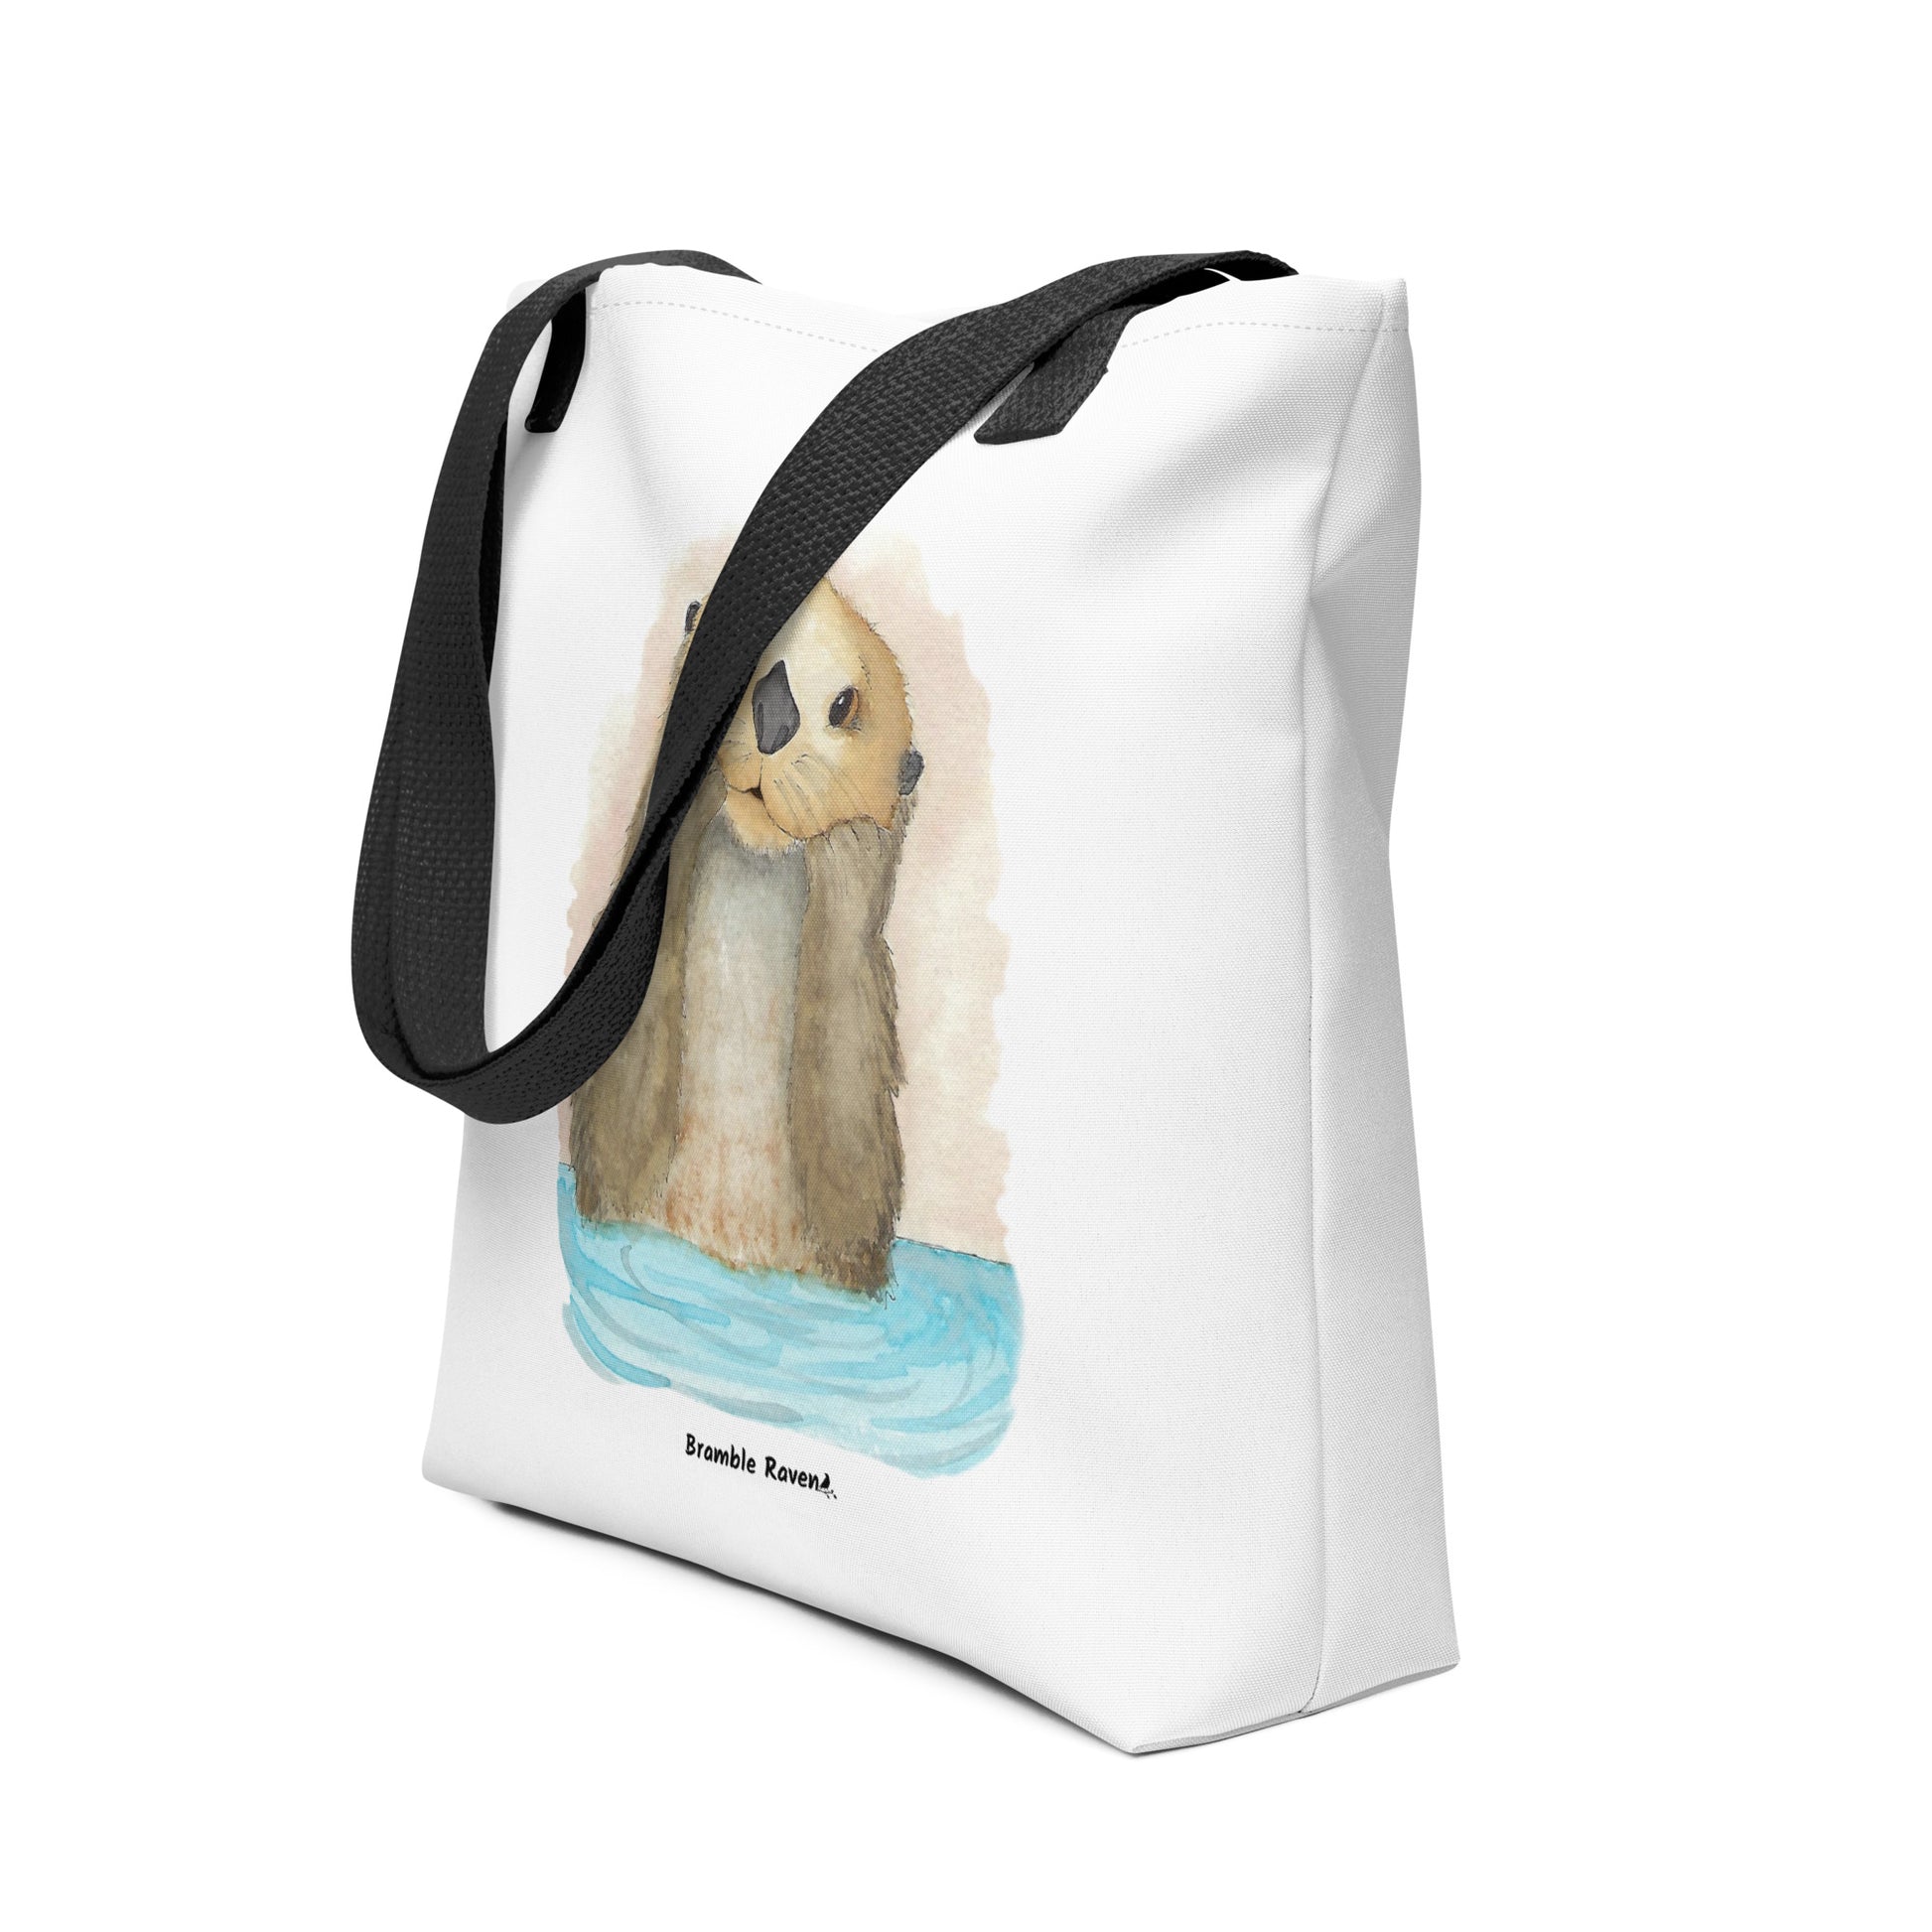 Otter Amazement sturdy tote bag. Measures 15" by 15" and can hold up to 44 lbs. Features watercolor sea otter painting printed on front and back. Has black handles. Shown sitting on the floor.